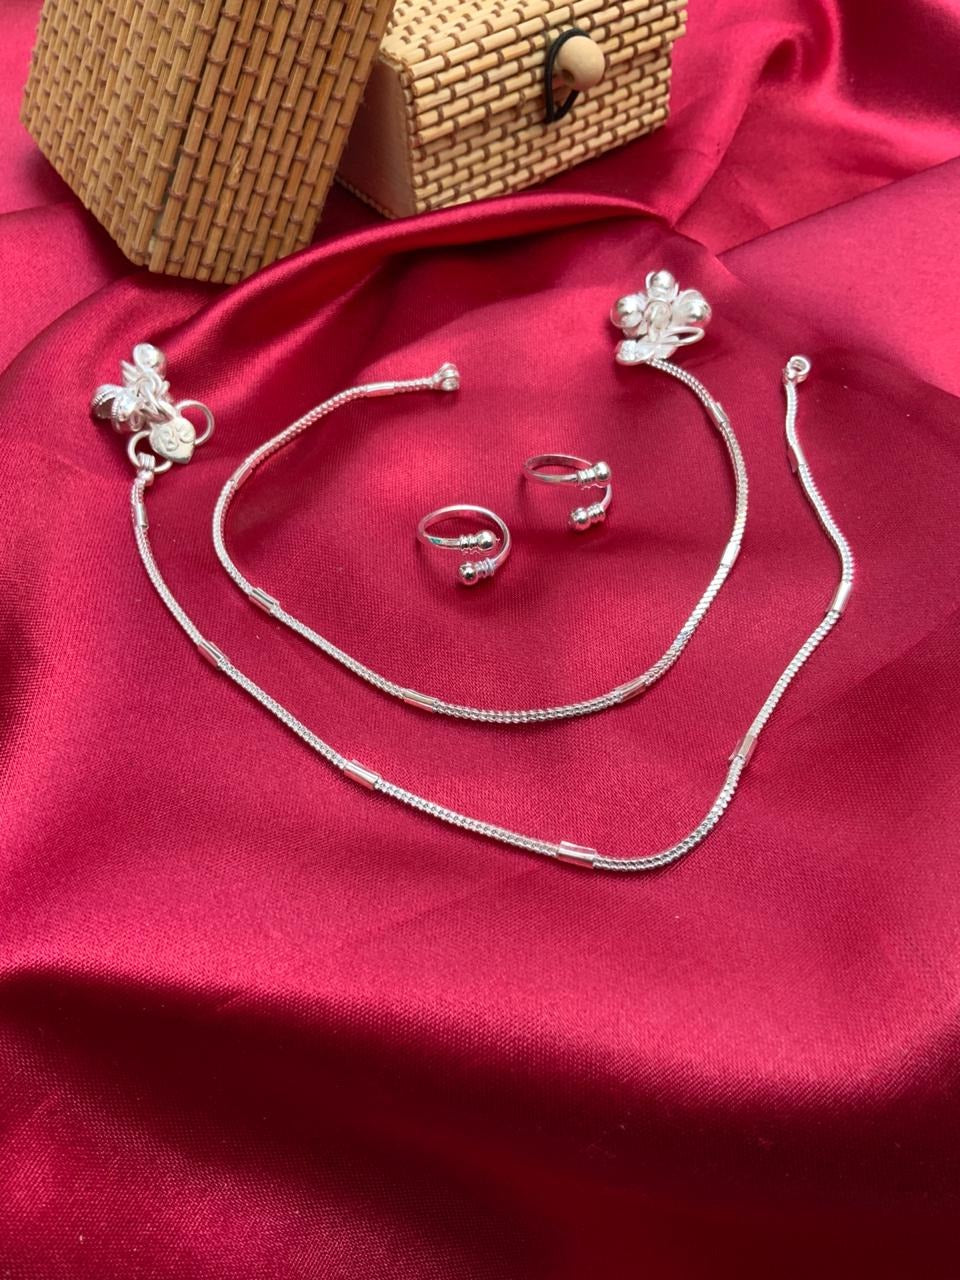 Beautiful Silver Anklet Toerings Combo Jewellery